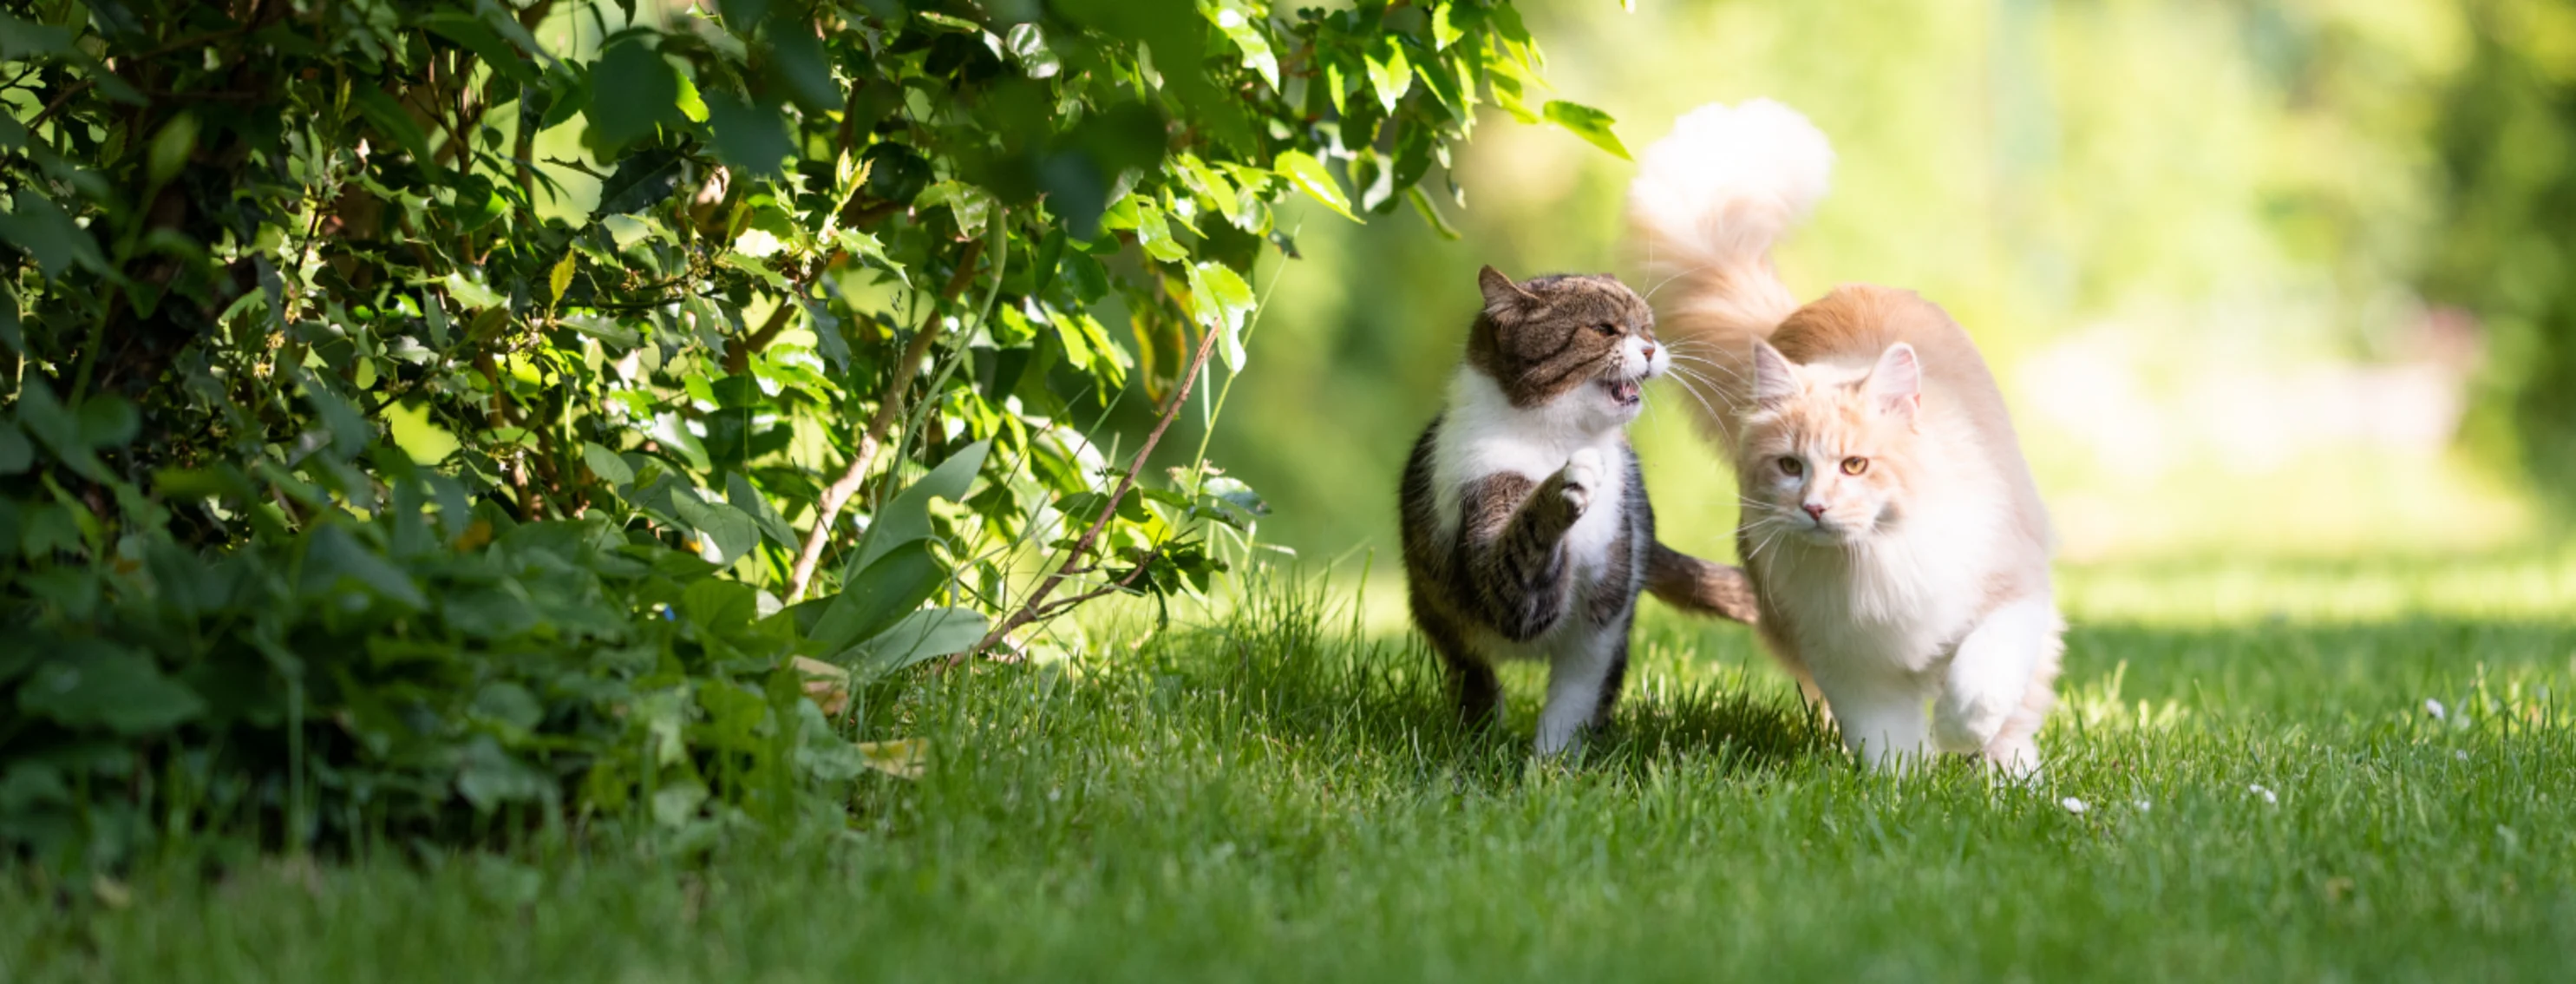 Two Cats Walking Down in Grassy Area